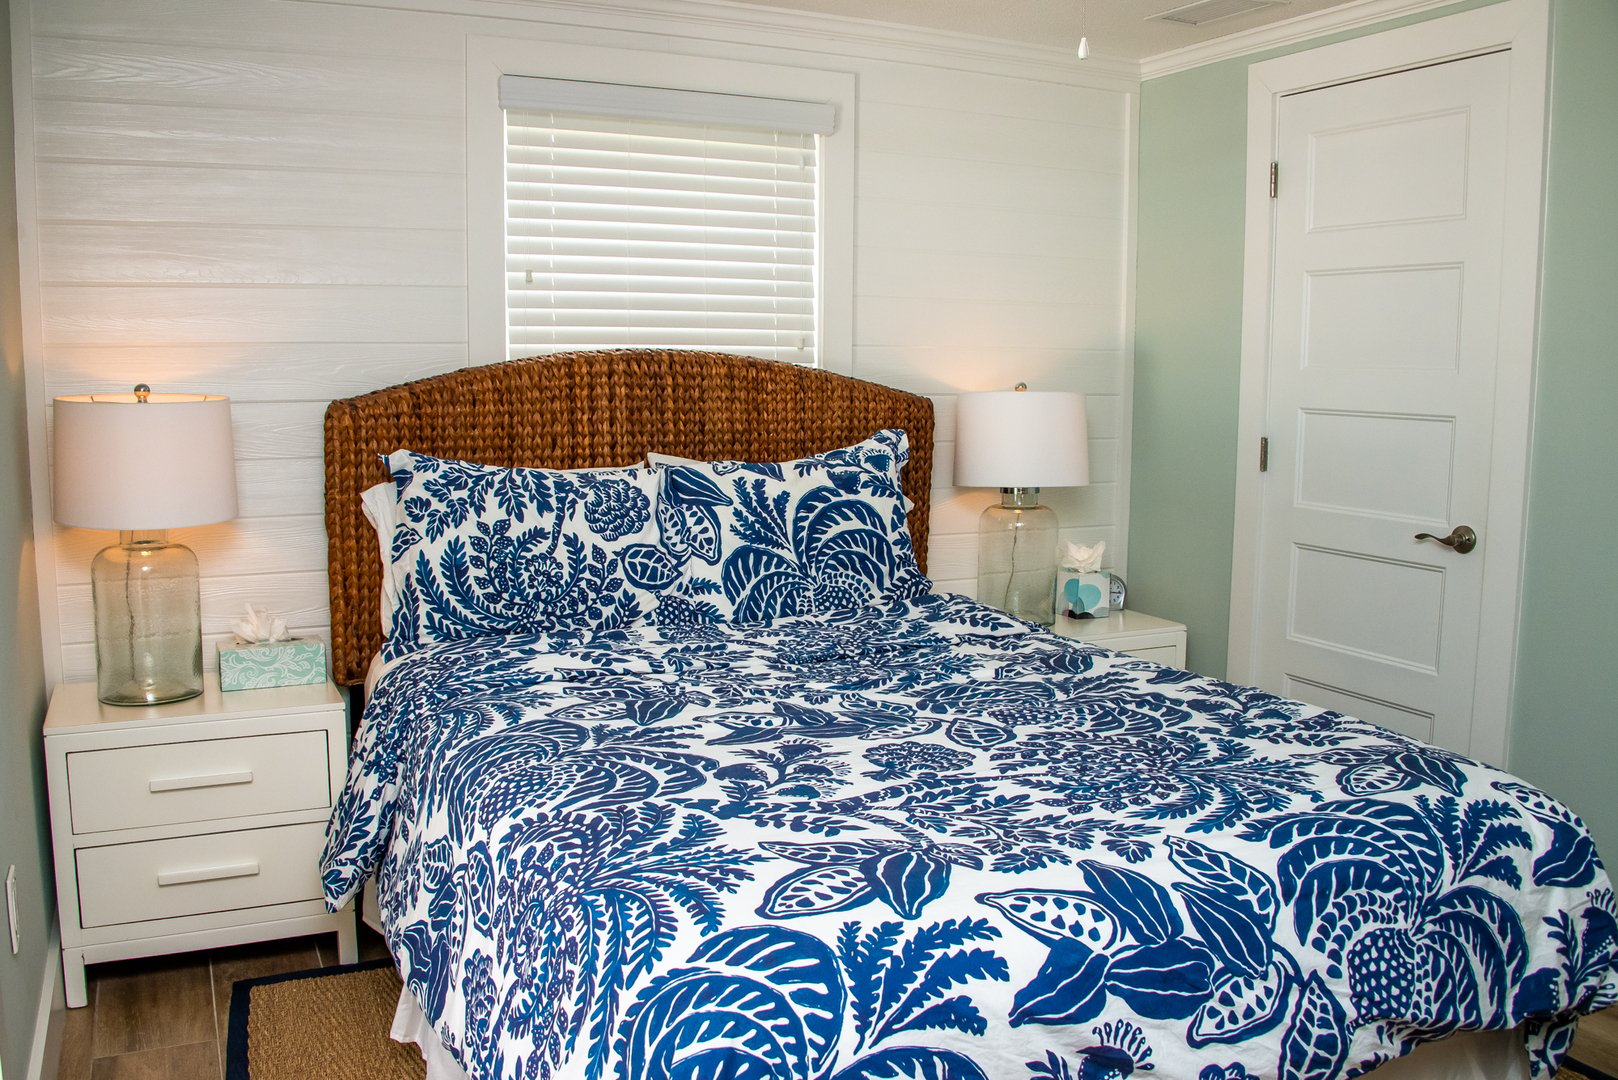 Island Time guest bedroom